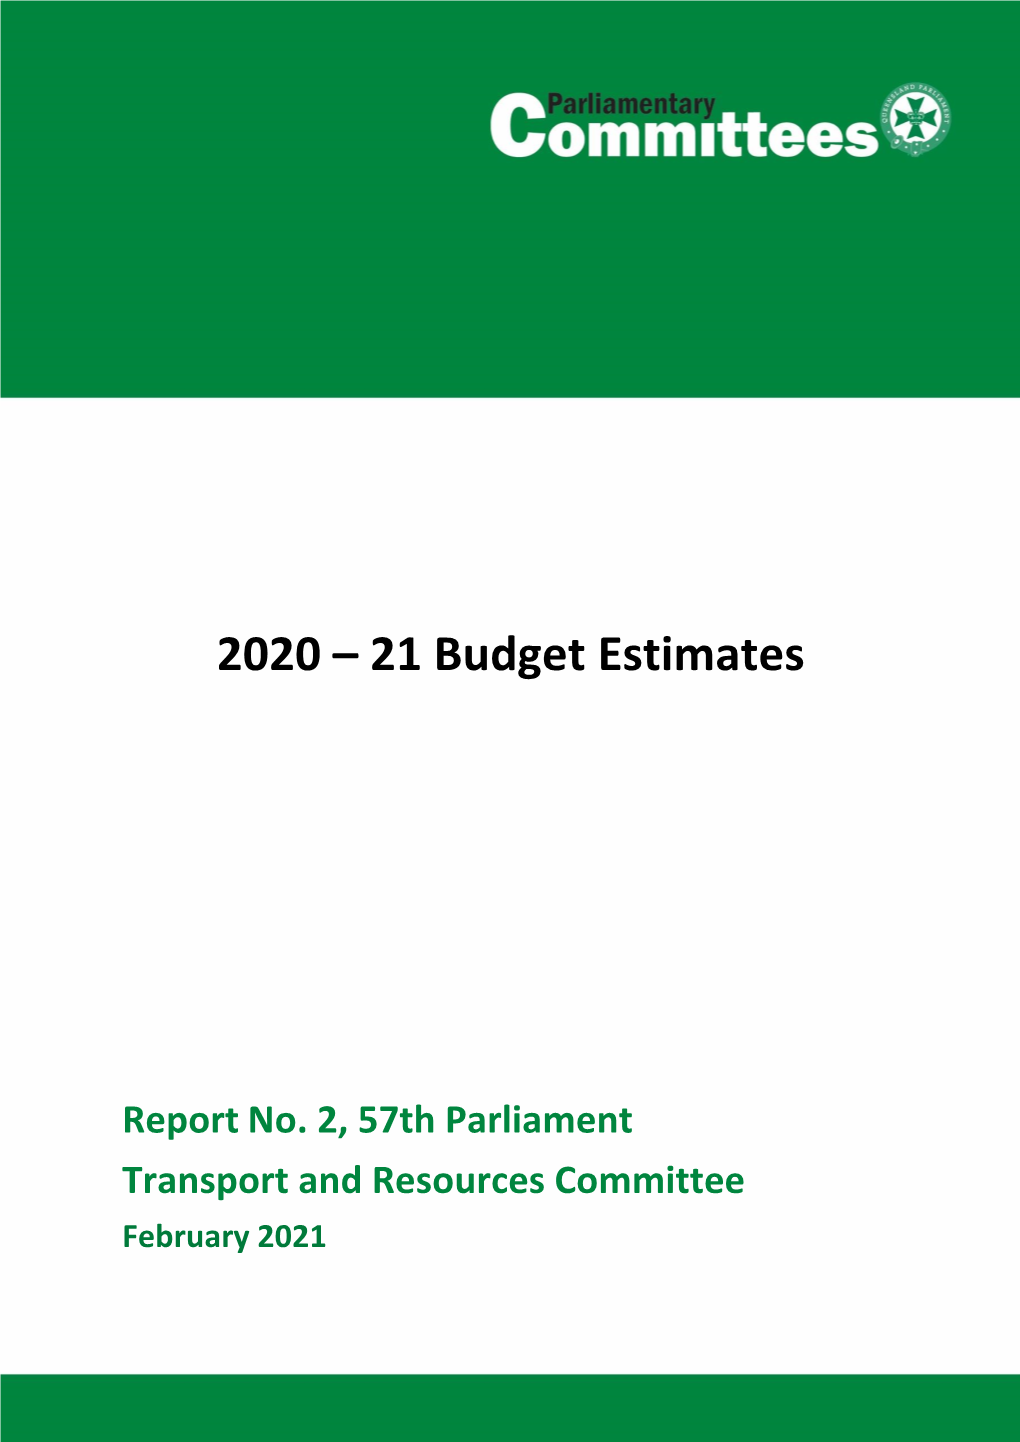 Transport and Resources Committee Report No 2, 57Th Parliament 2020